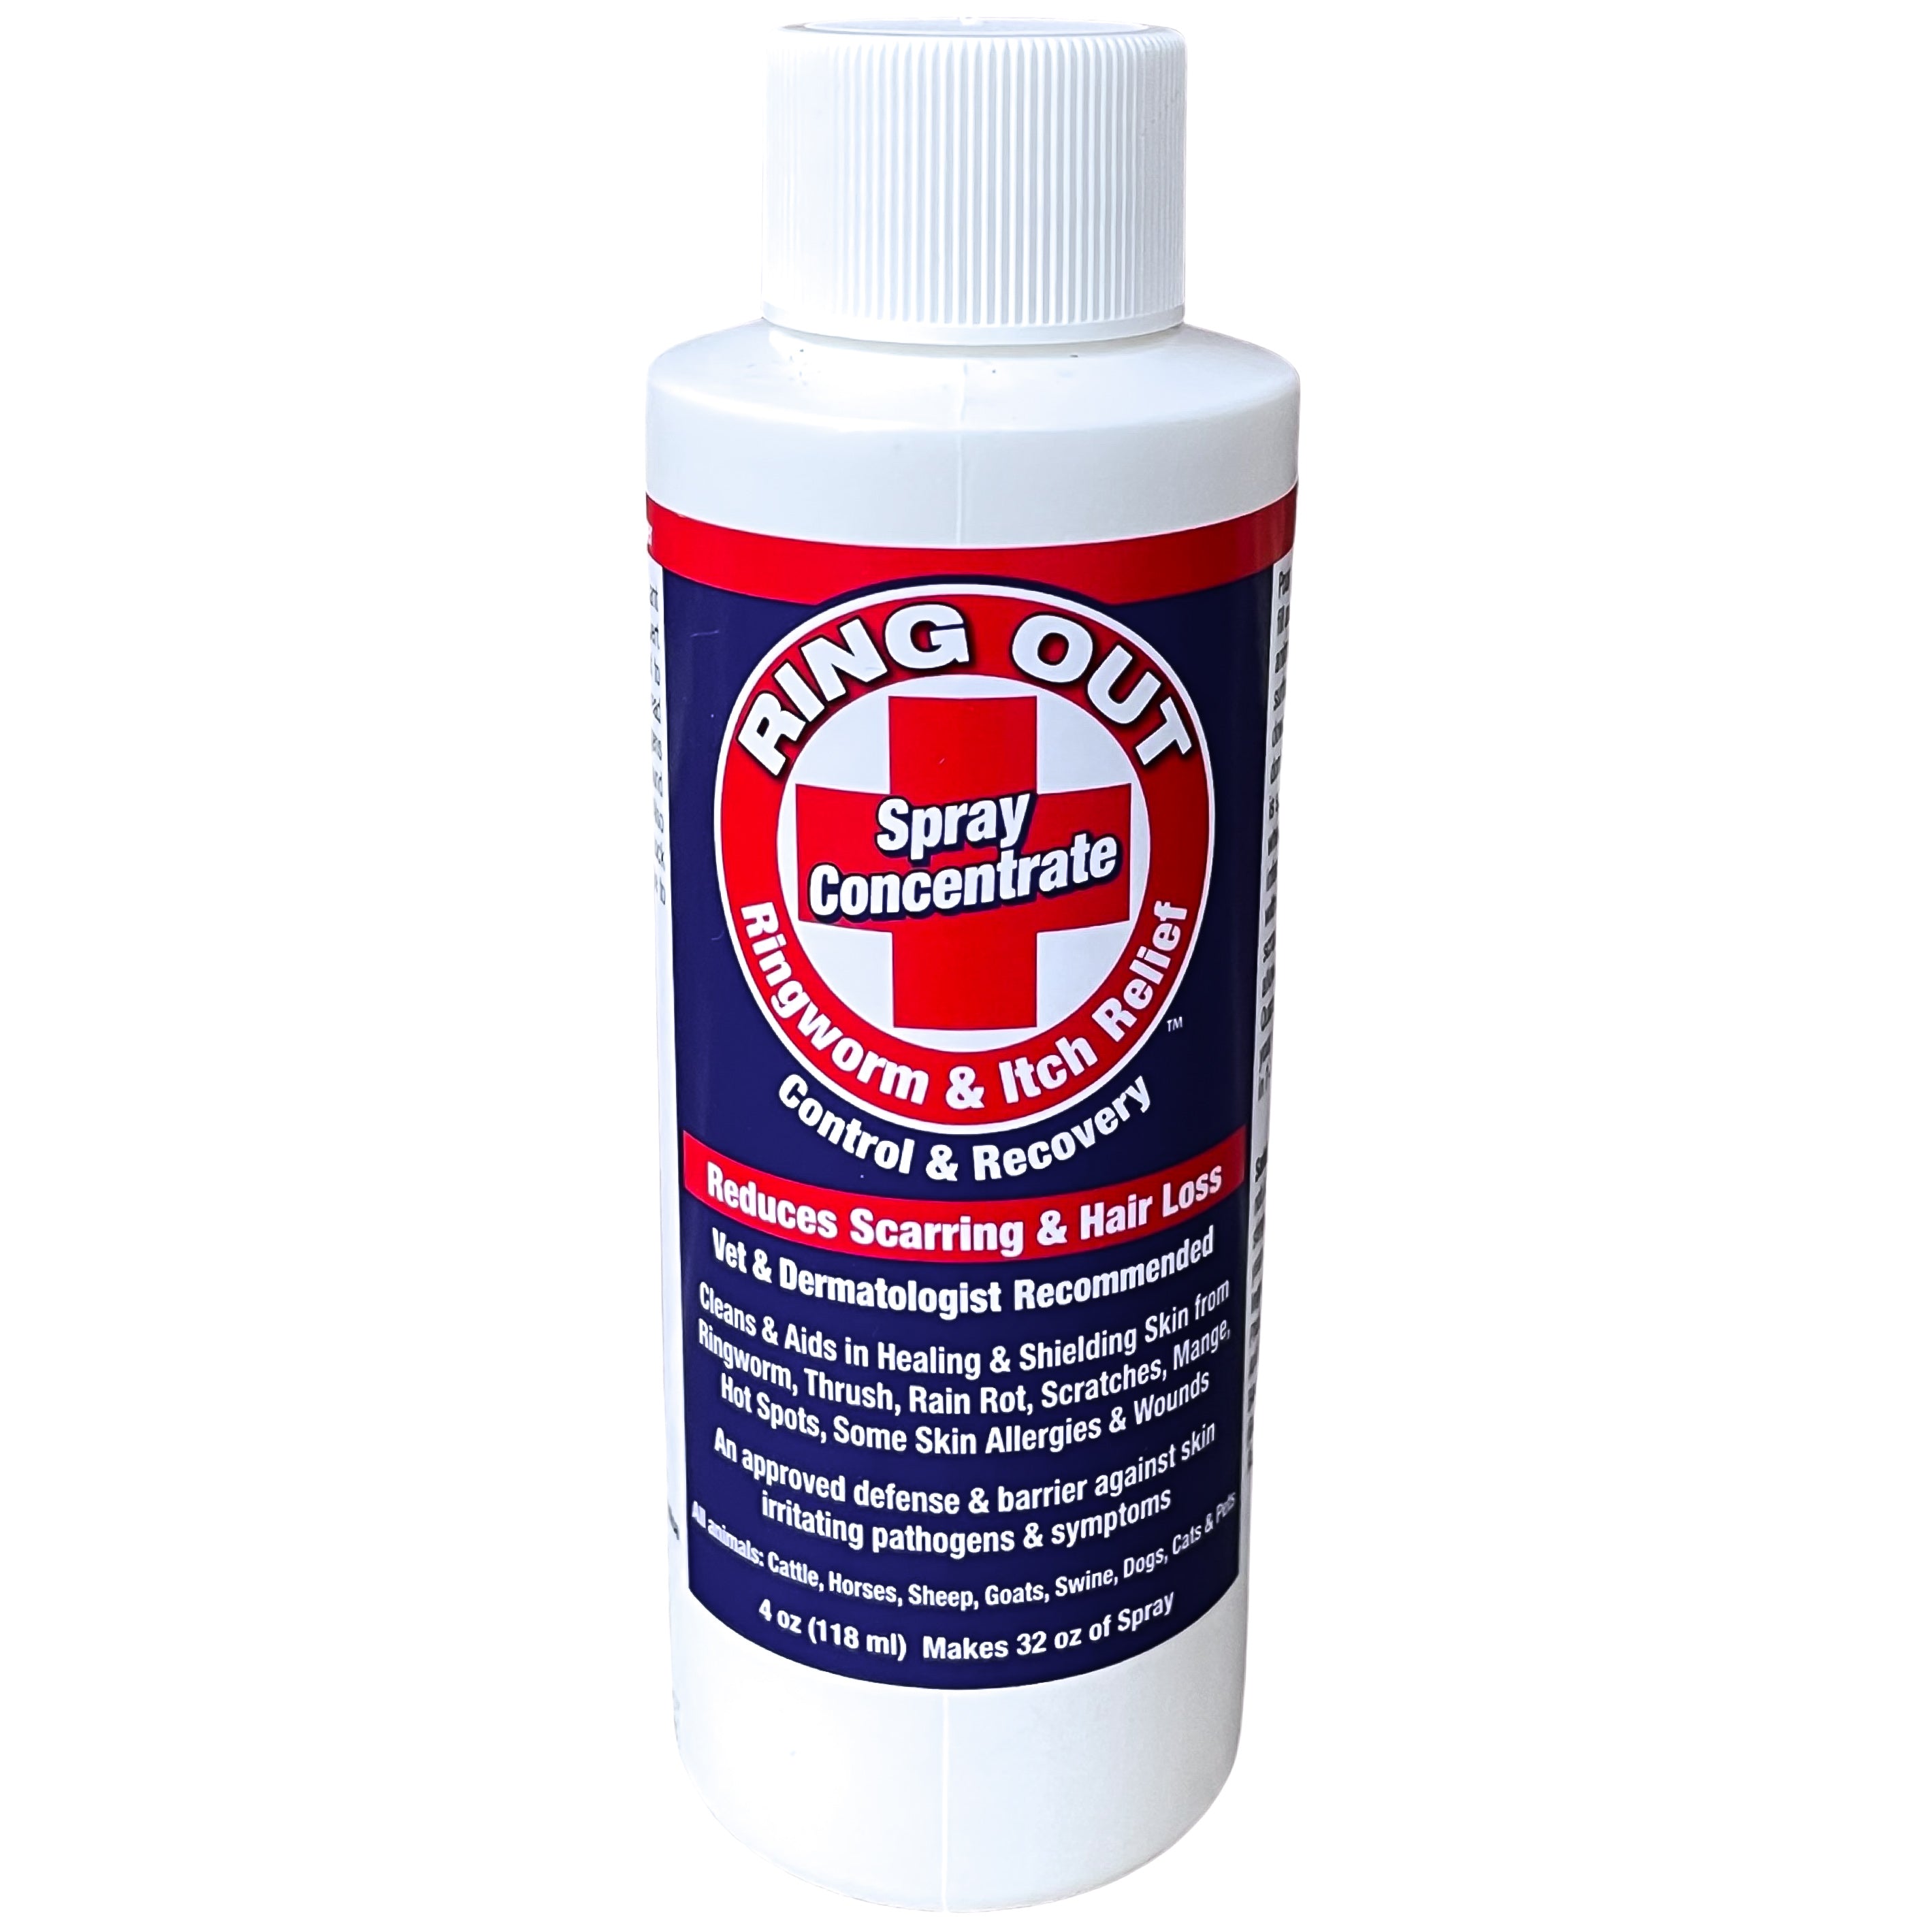 Ringworm Prevention Pack - Ring Out, Ring Out Shampoo, Sprayer - Prevent & Help Treat Ringworm & Fungus